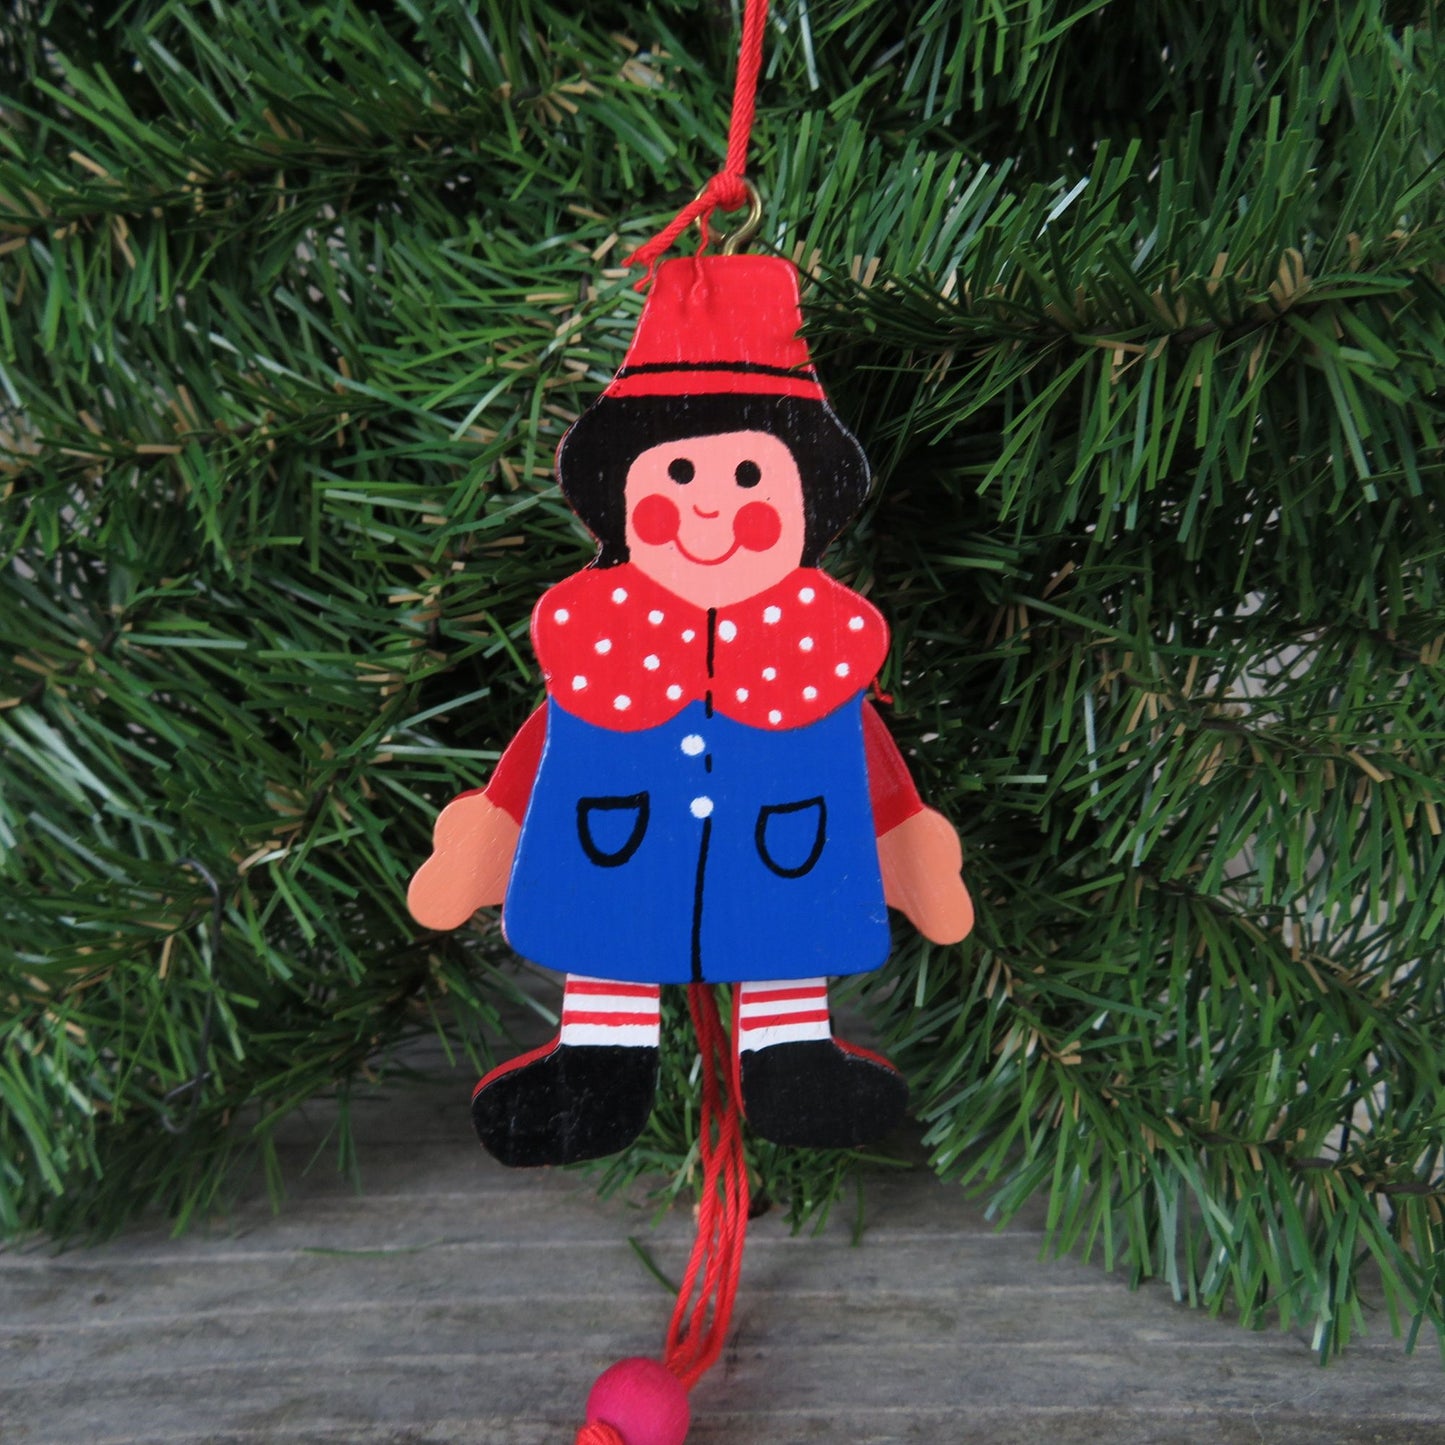 Red and Blue Boy Pull String Wood Ornament Vintage Wooden Jumping Toy Christmas Ornament